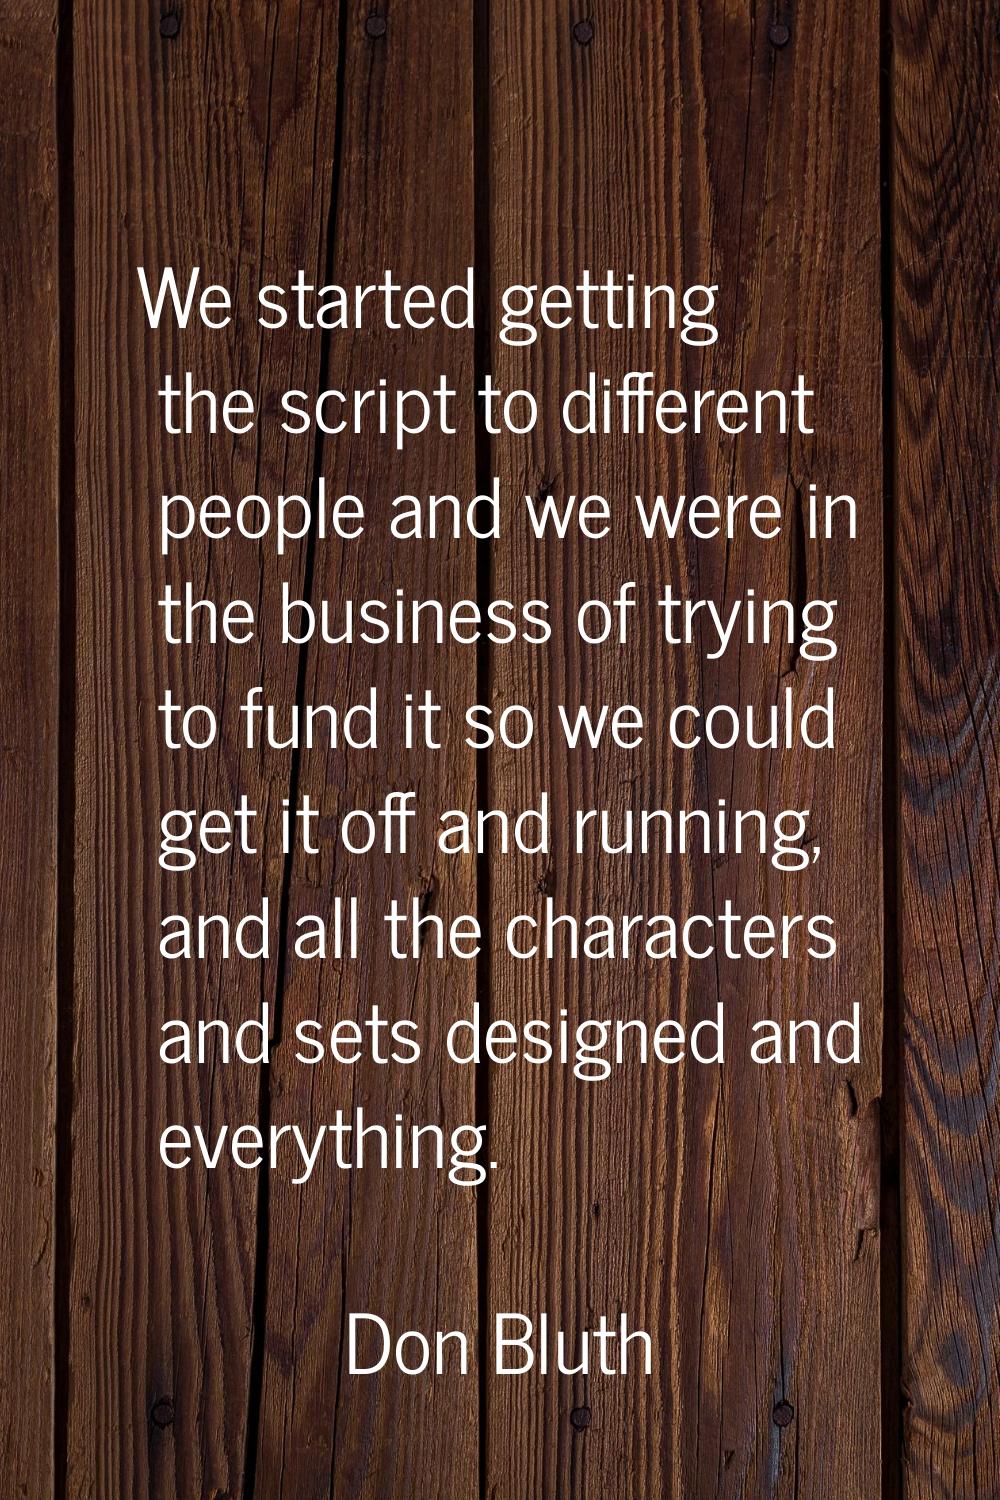 We started getting the script to different people and we were in the business of trying to fund it 